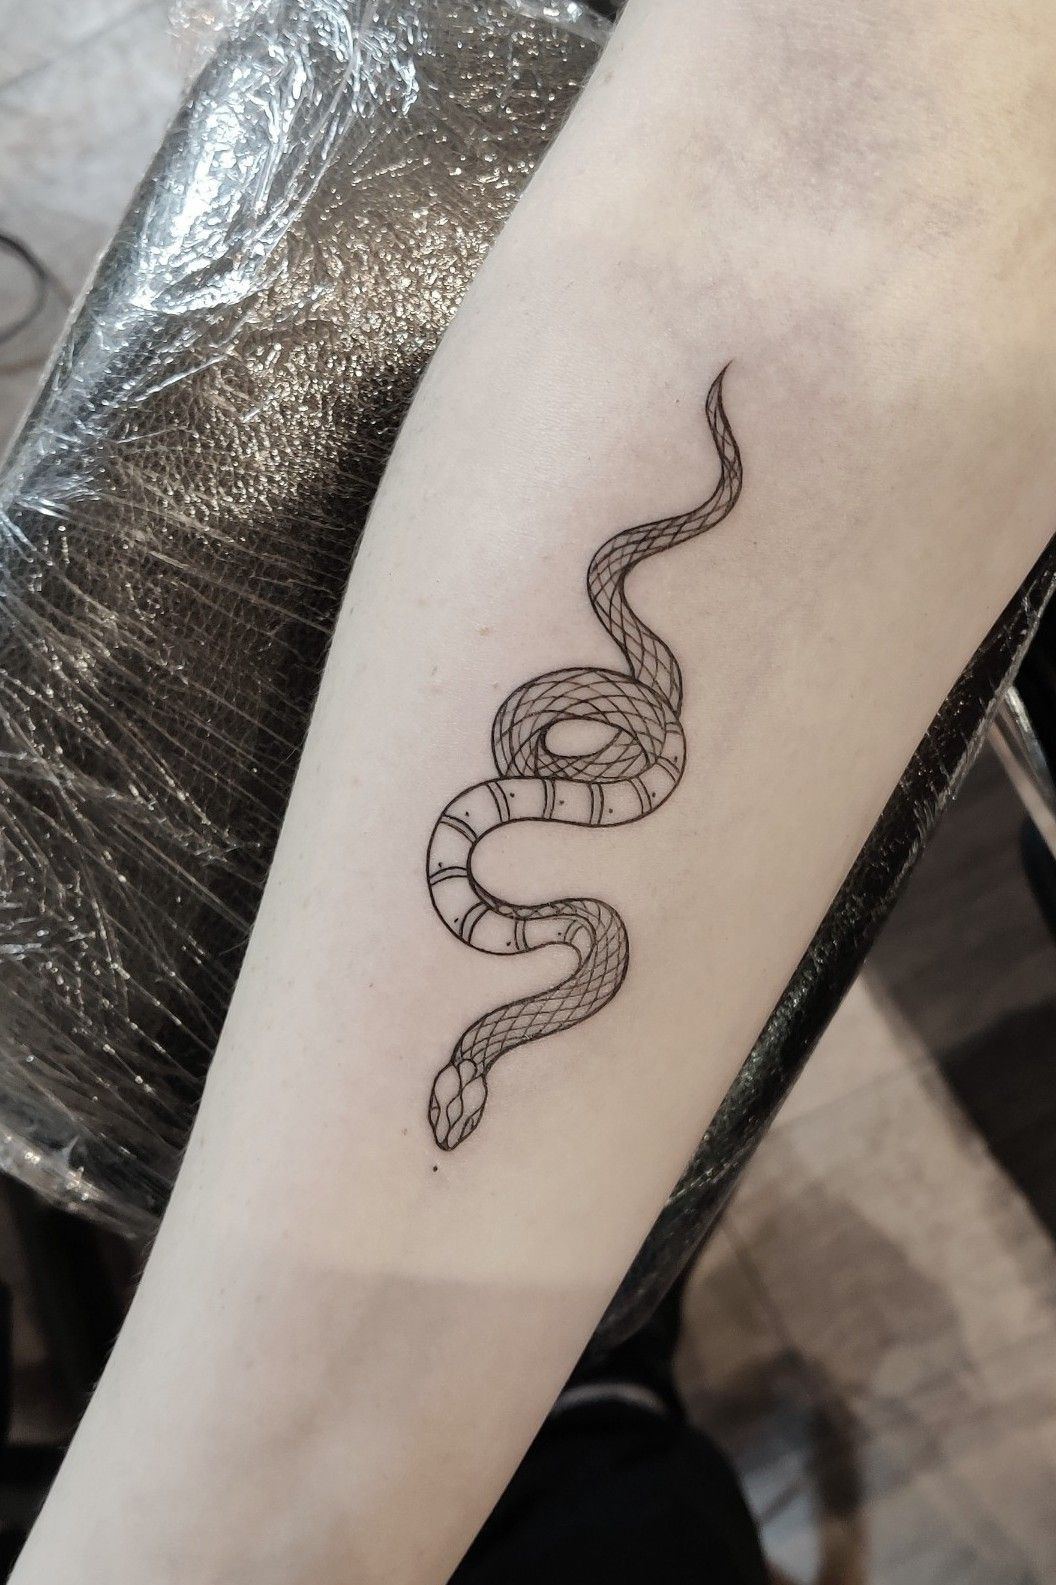 Simple snake wrapped around a crescent moon, from bottom up tattoo idea |  TattoosAI